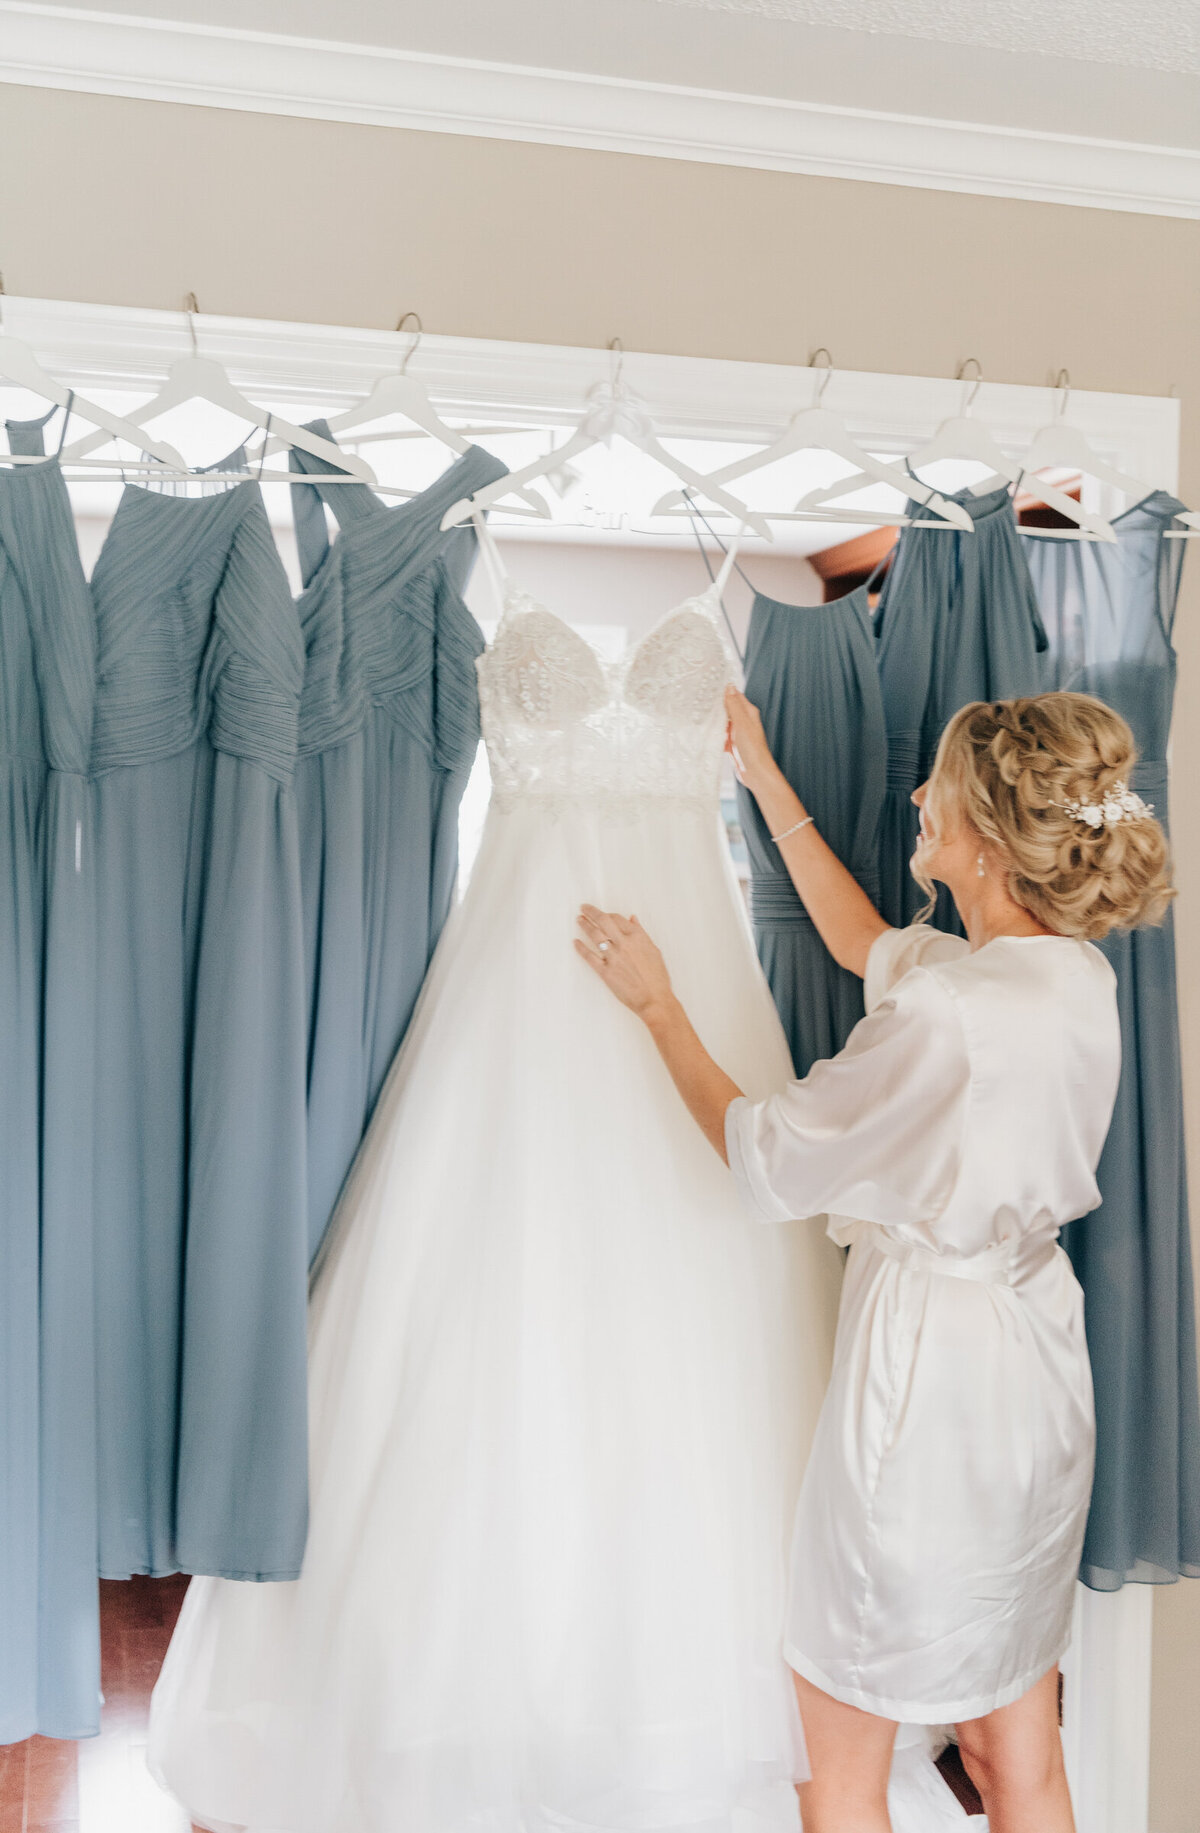 Gorgeous bride holds up her wedding dress beside light blue bridesmaids dresses while getting ready